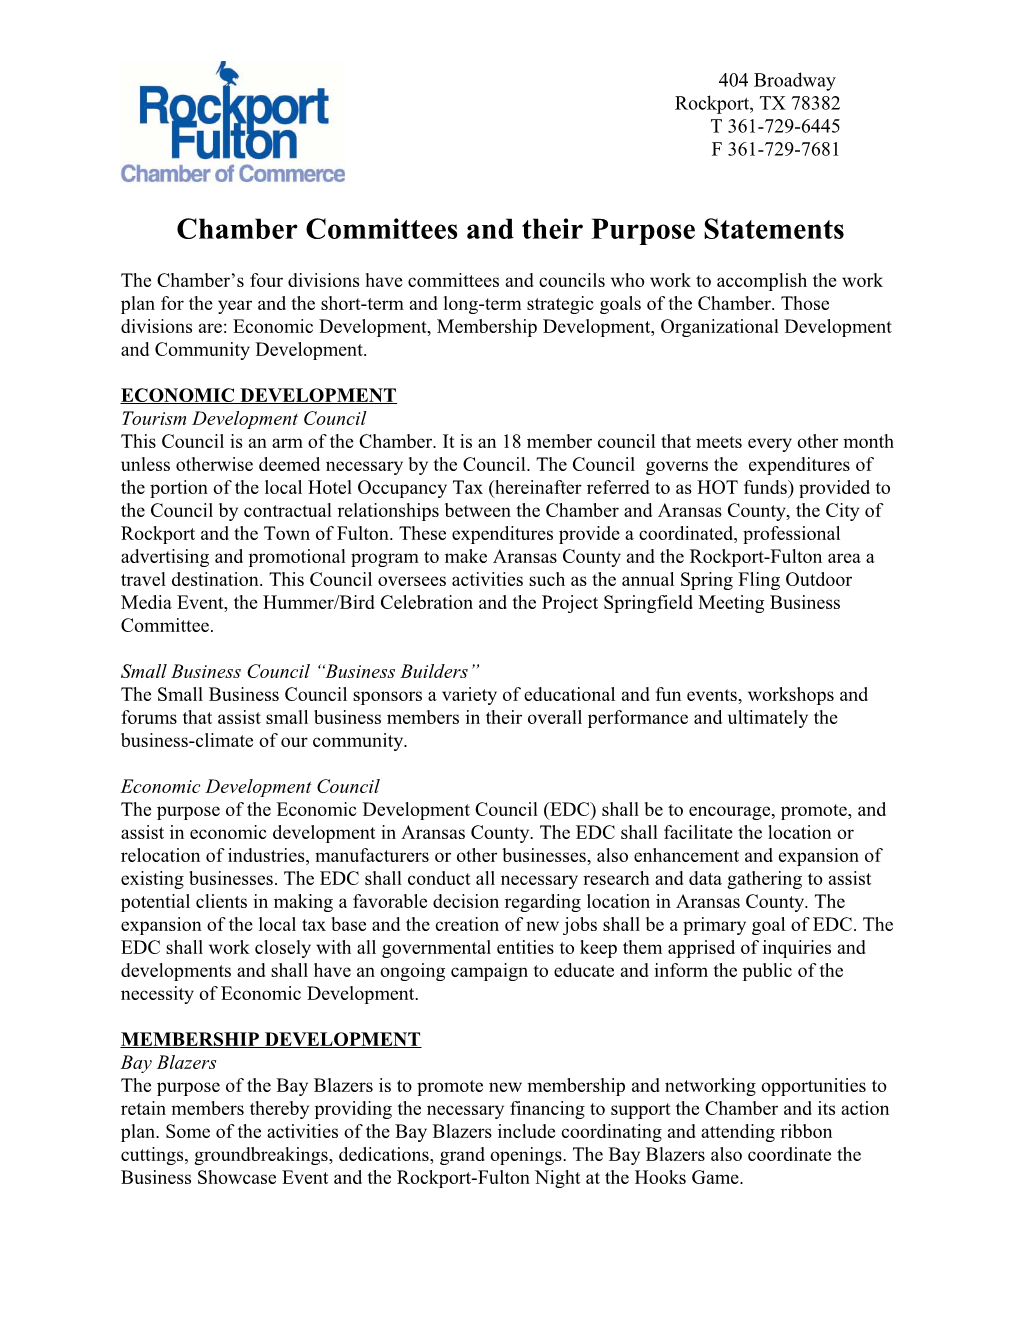 Chamber Committees and Their Purpose Statements